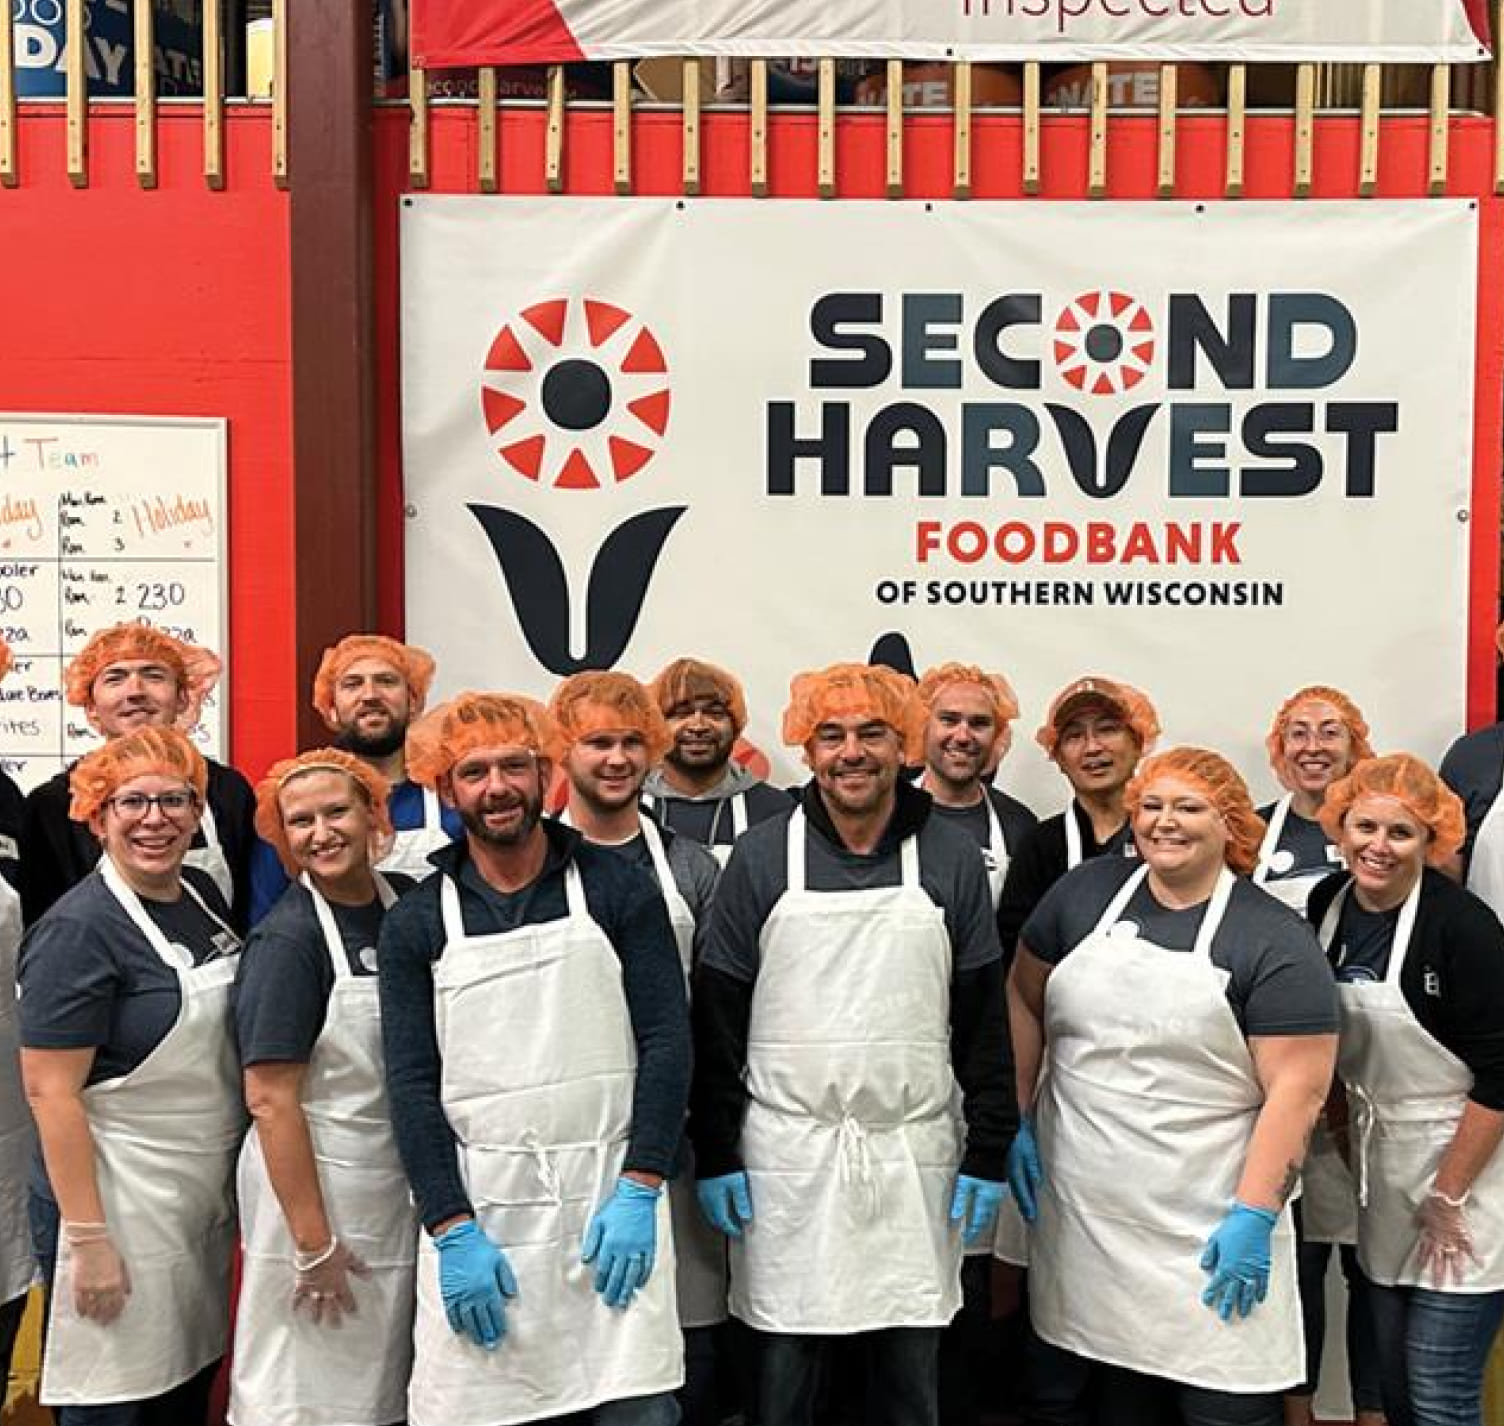 The Investors Associated team volunteering at Second Harvest Foodbank of Southern Wisconsin.